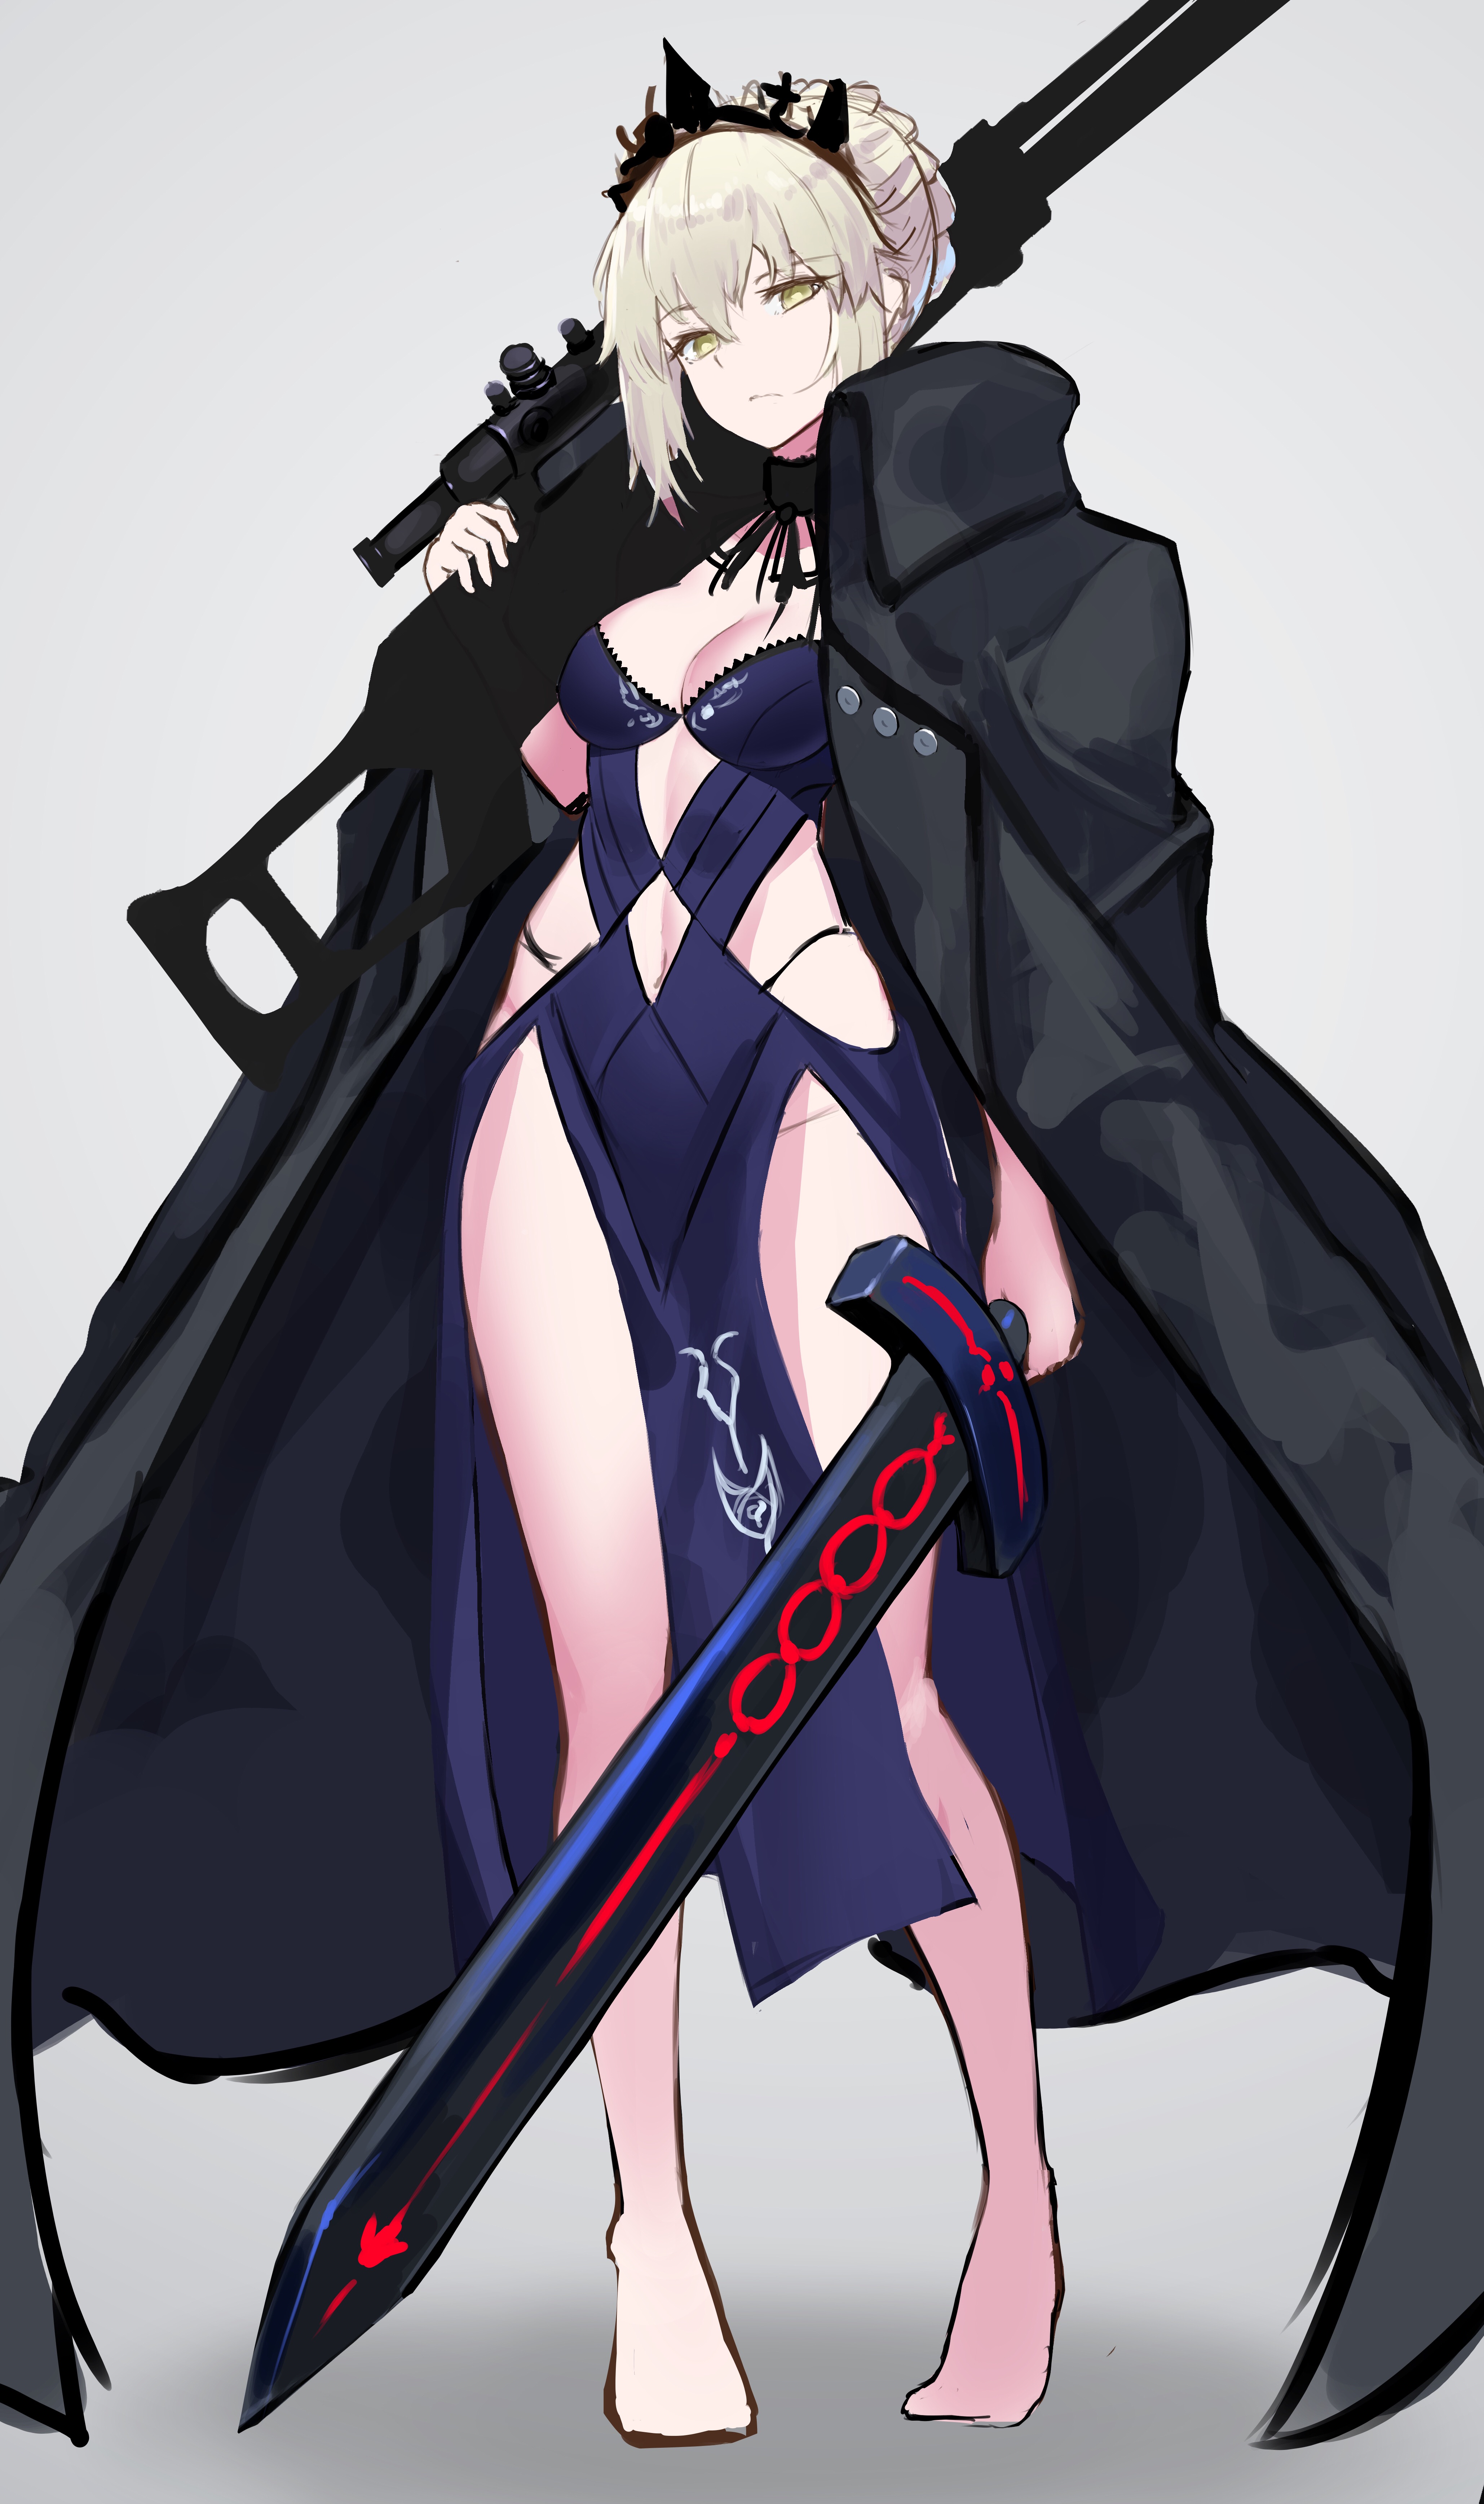 Anime 4116x6944 anime anime girls digital art artwork portrait display simple background Saber Alter Fate/Grand Order sword sniper rifle 2D weapon women with swords short hair blonde green eyes boobs big boobs dress belly button jacket Fate series Artoria Pendragon